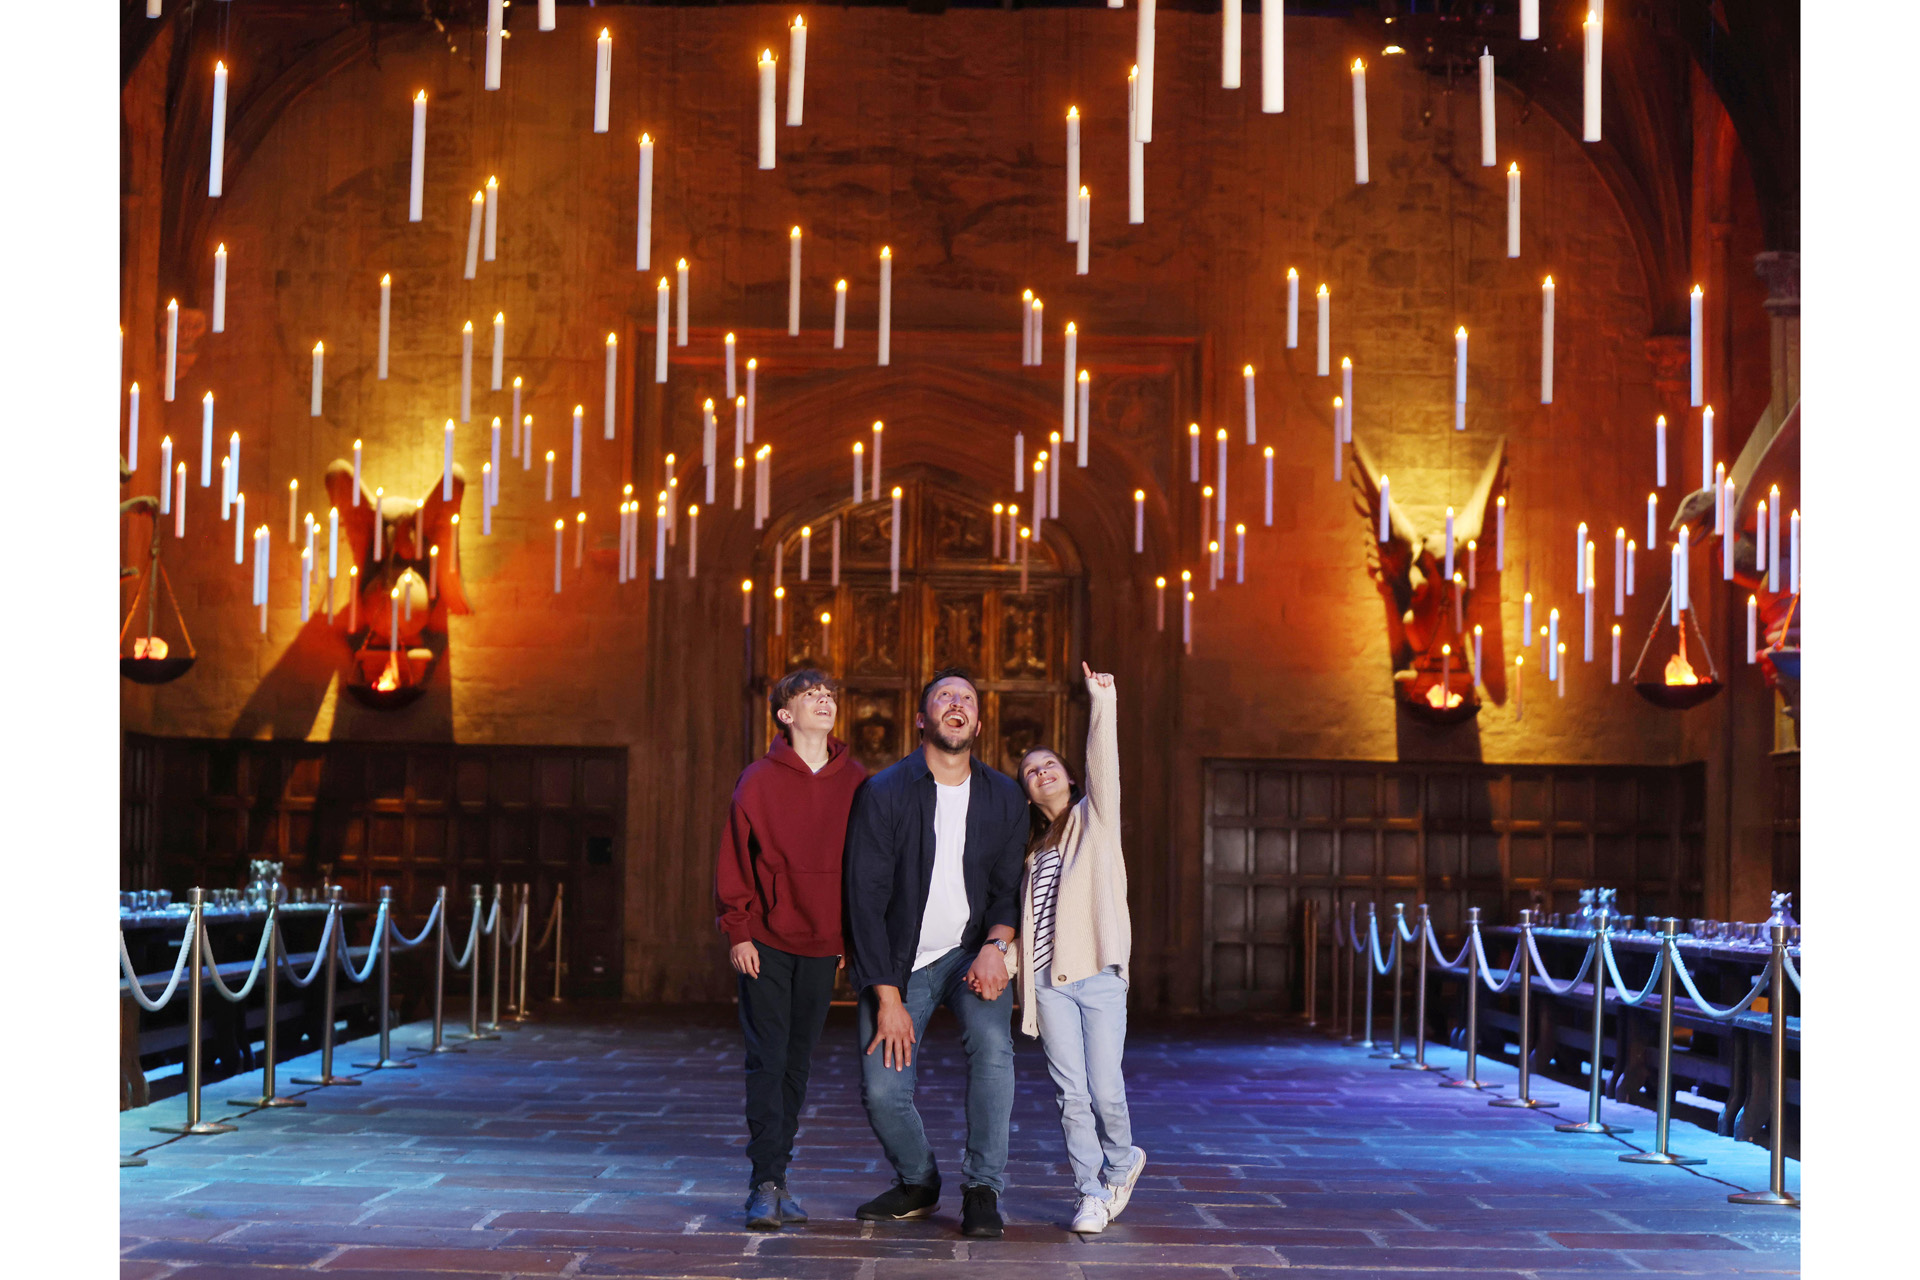 400 floating candles adorn the enchanted ceiling of the Great Hall for the first time at Warner Bros. Studio Tour London as the brand-new feature